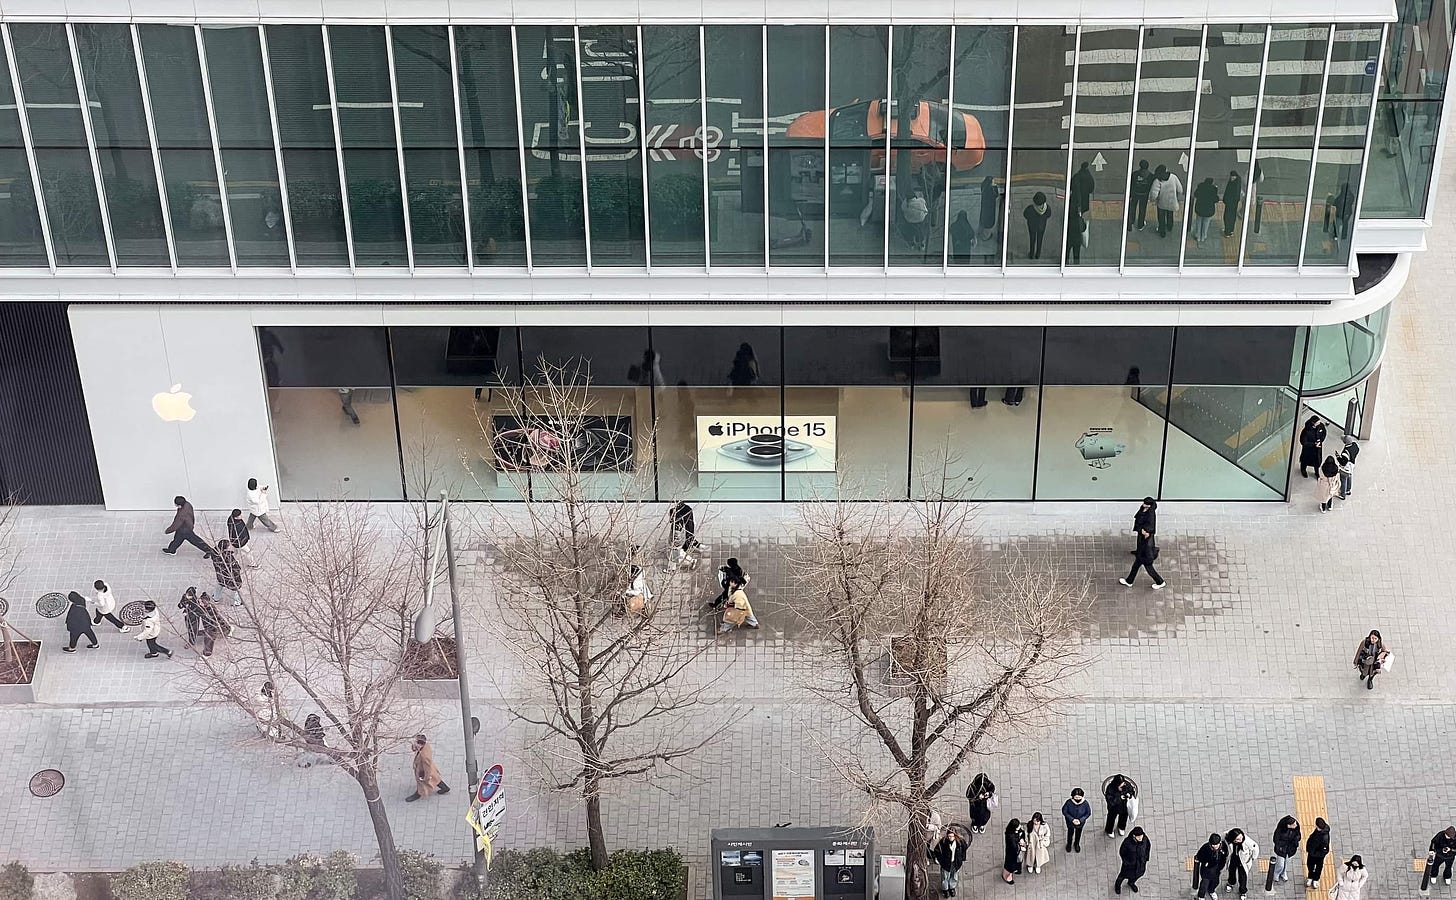 The exterior of Apple Hongdae and adjacent walkway, shot from a high vantage point.